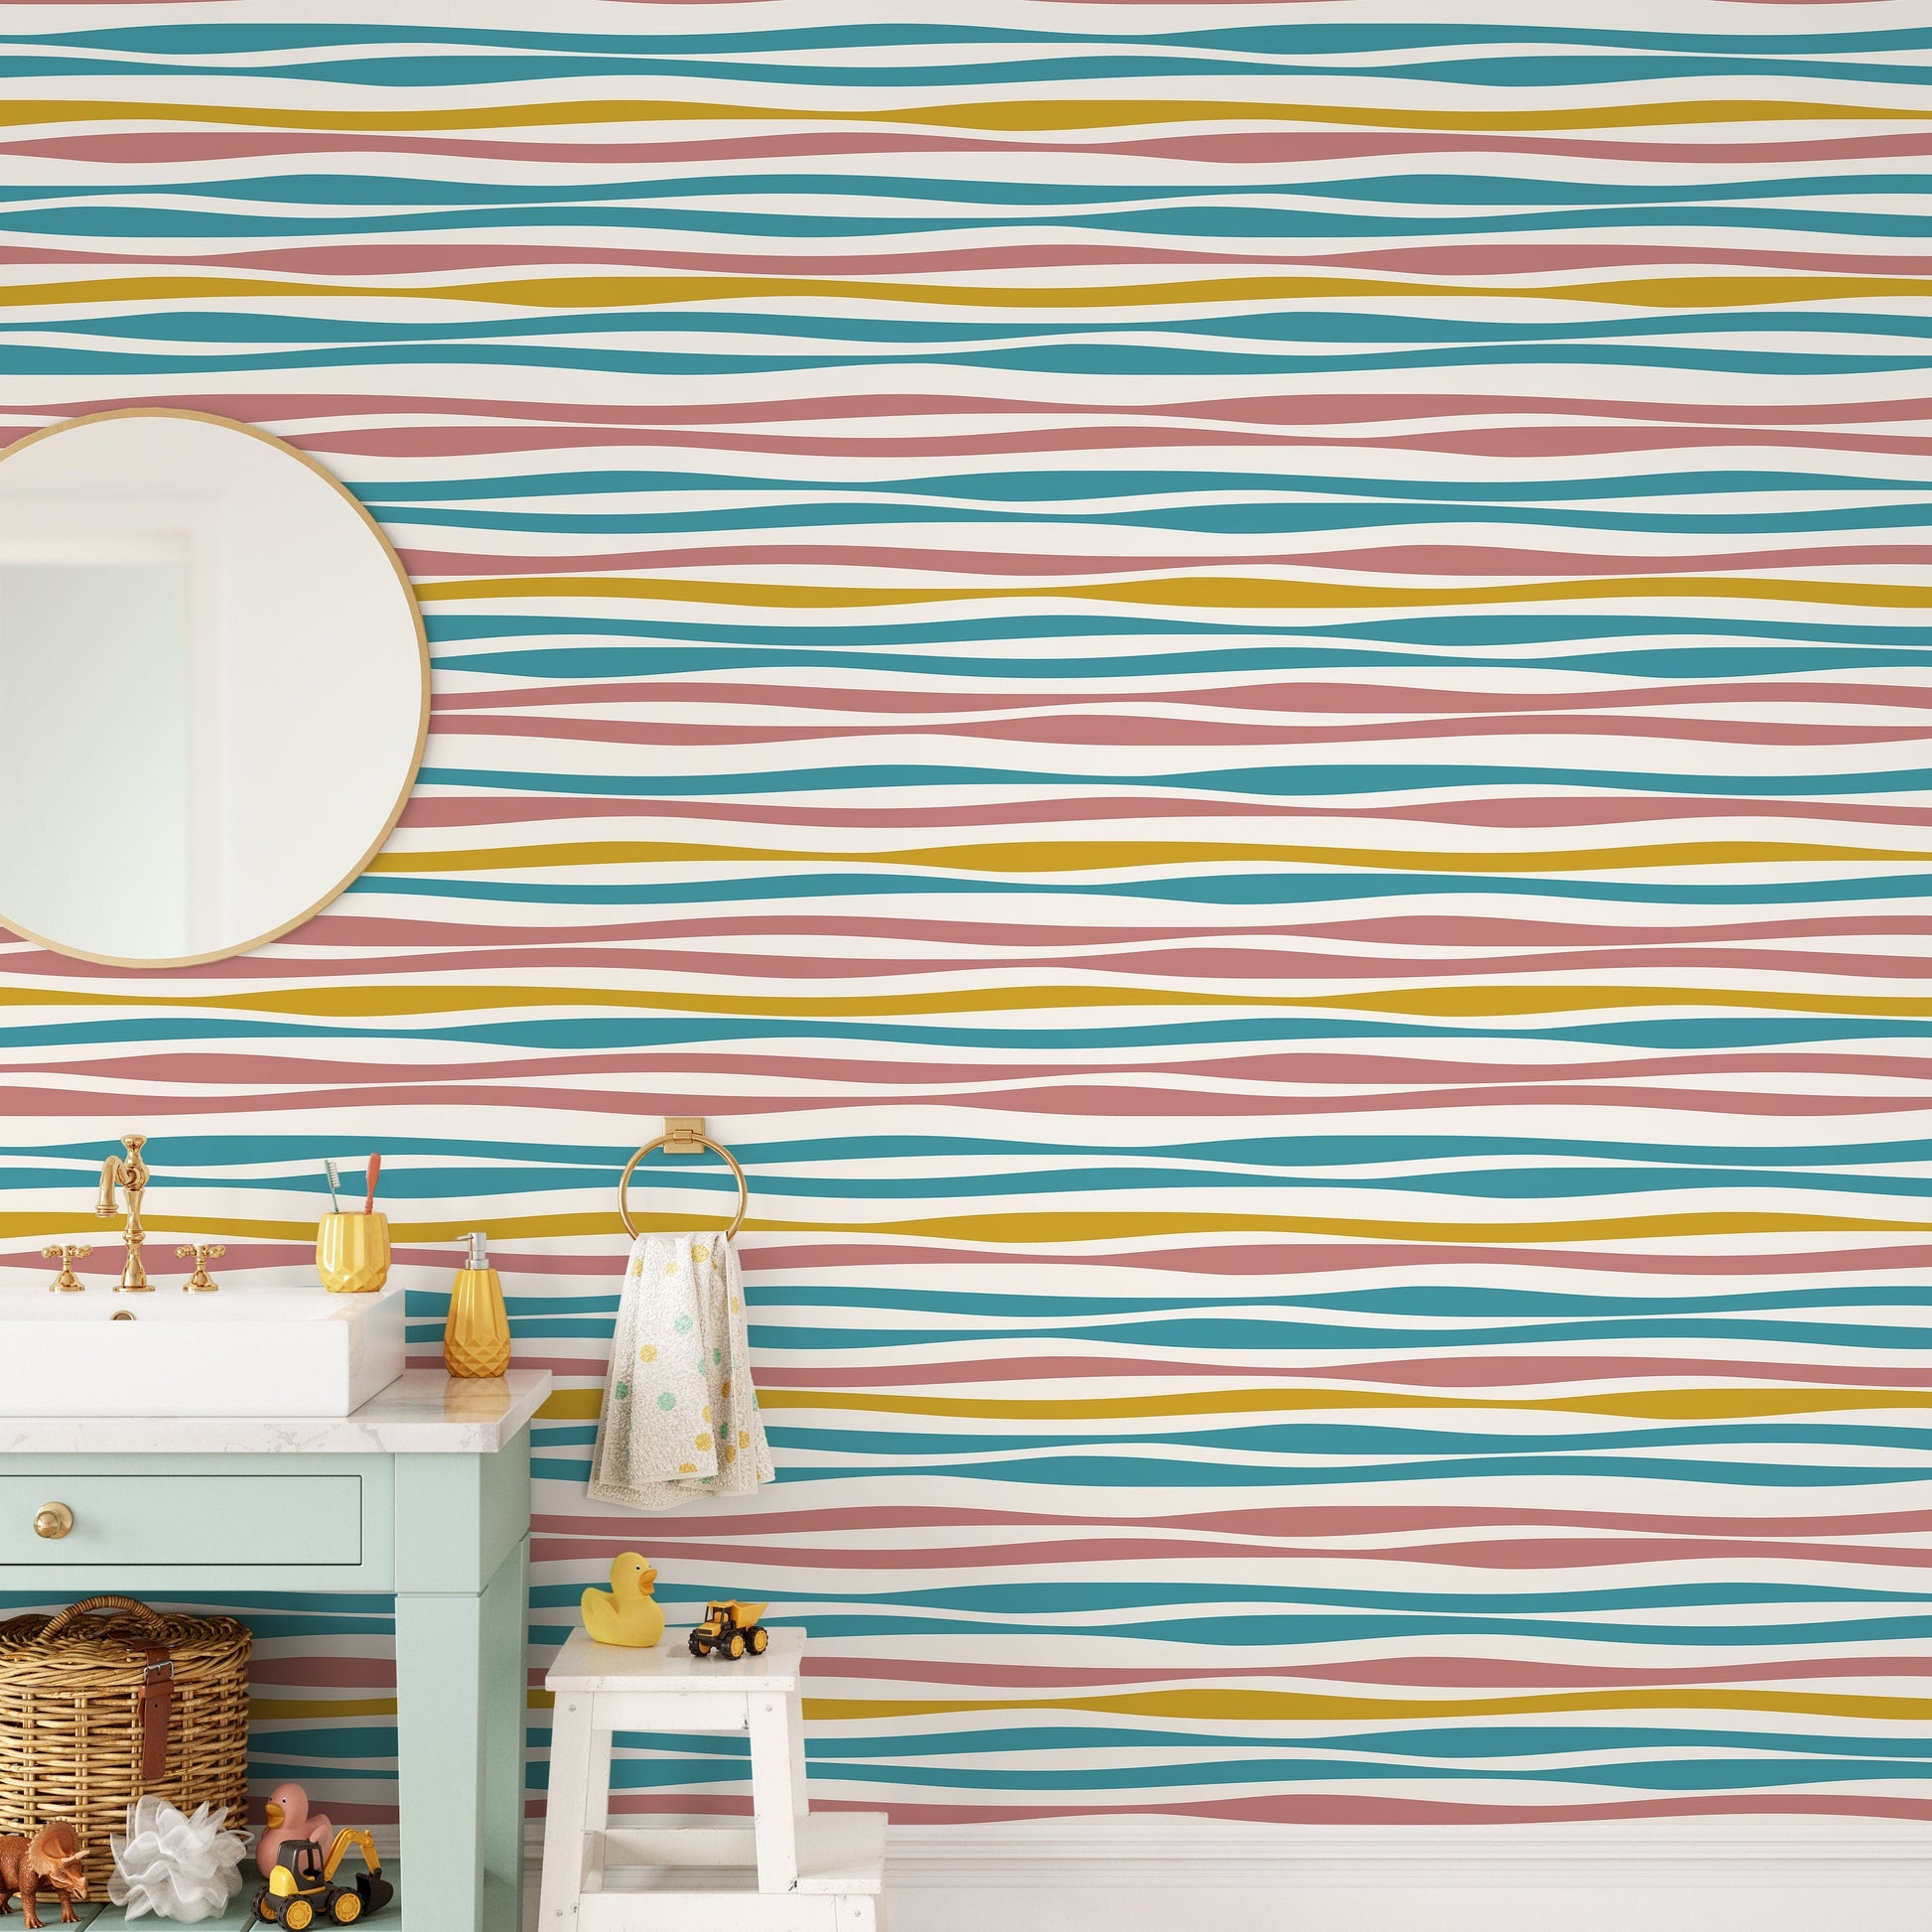 Colorful Abstract Striped Wallpaper / Peel and Stick Wallpaper Removable Wallpaper Home Decor Wall Art Wall Decor Room Decor - D490